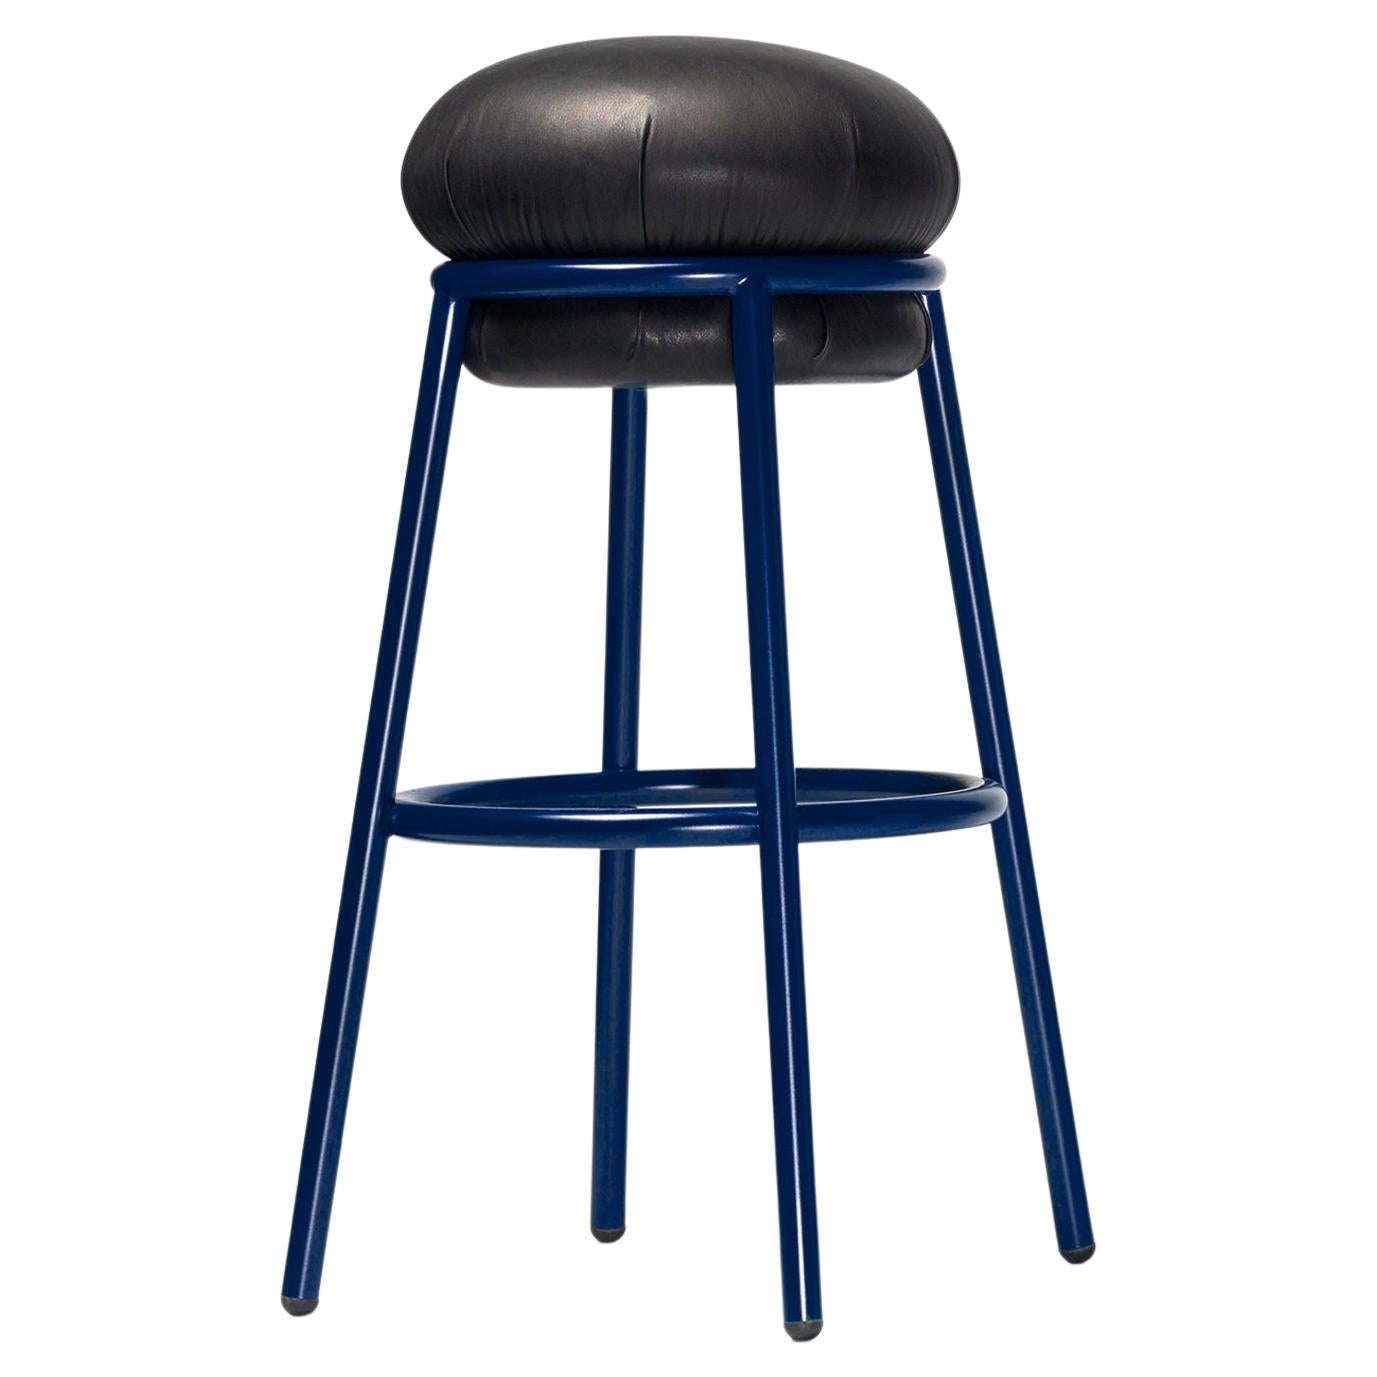 Grasso Bar Stool With Blue Steel Painted Framed With Black Leather Finish For Sale